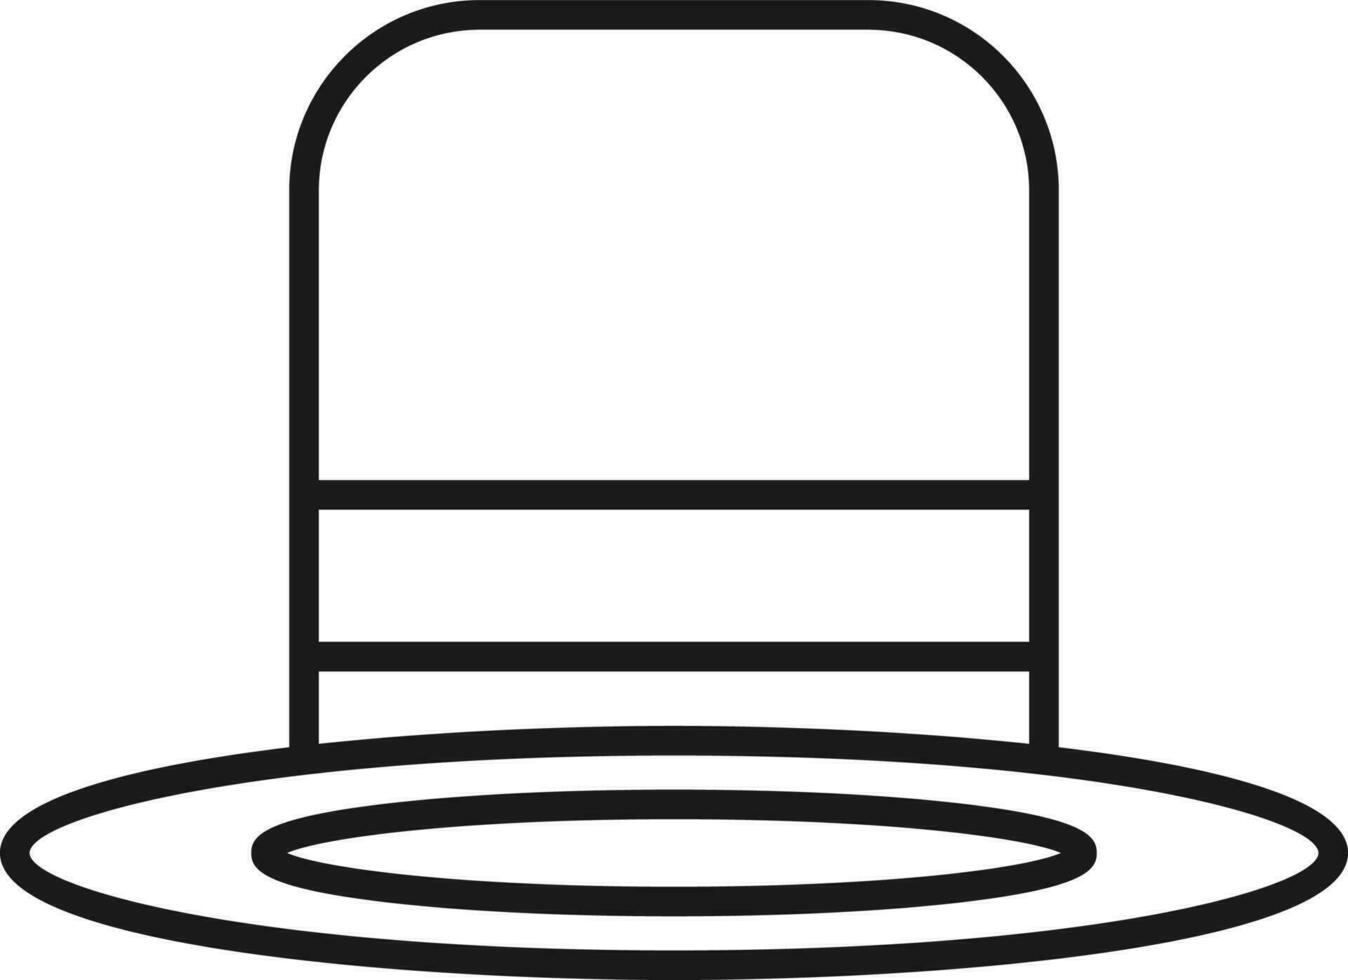 Top Hat Icon In Thin Line Art. vector